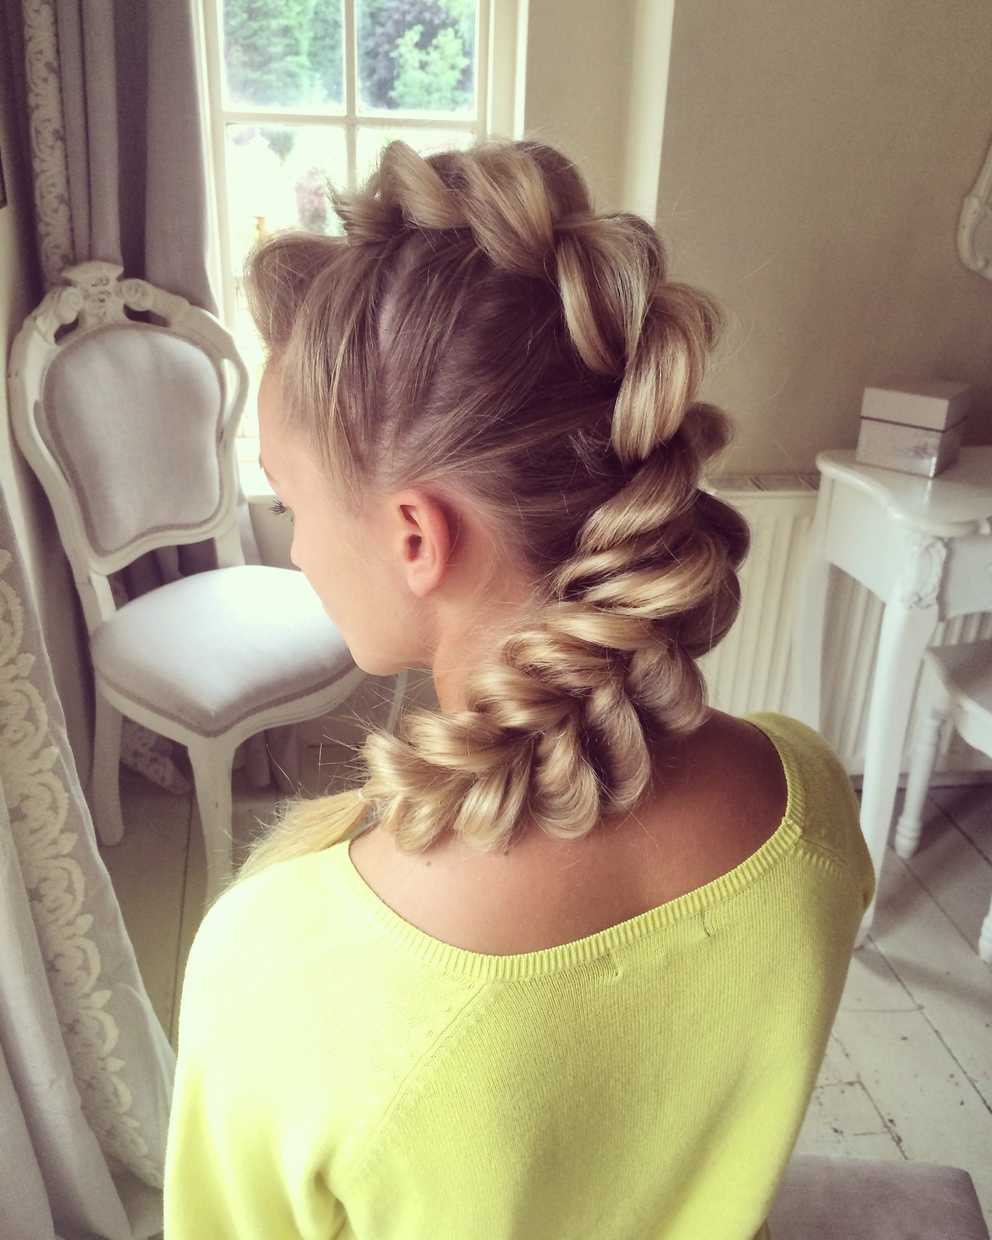 30 Braided Mohawk Styles That Turn Heads Intended For Recent Blonde Teased Mohawk Hairstyles (Gallery 13 of 20)